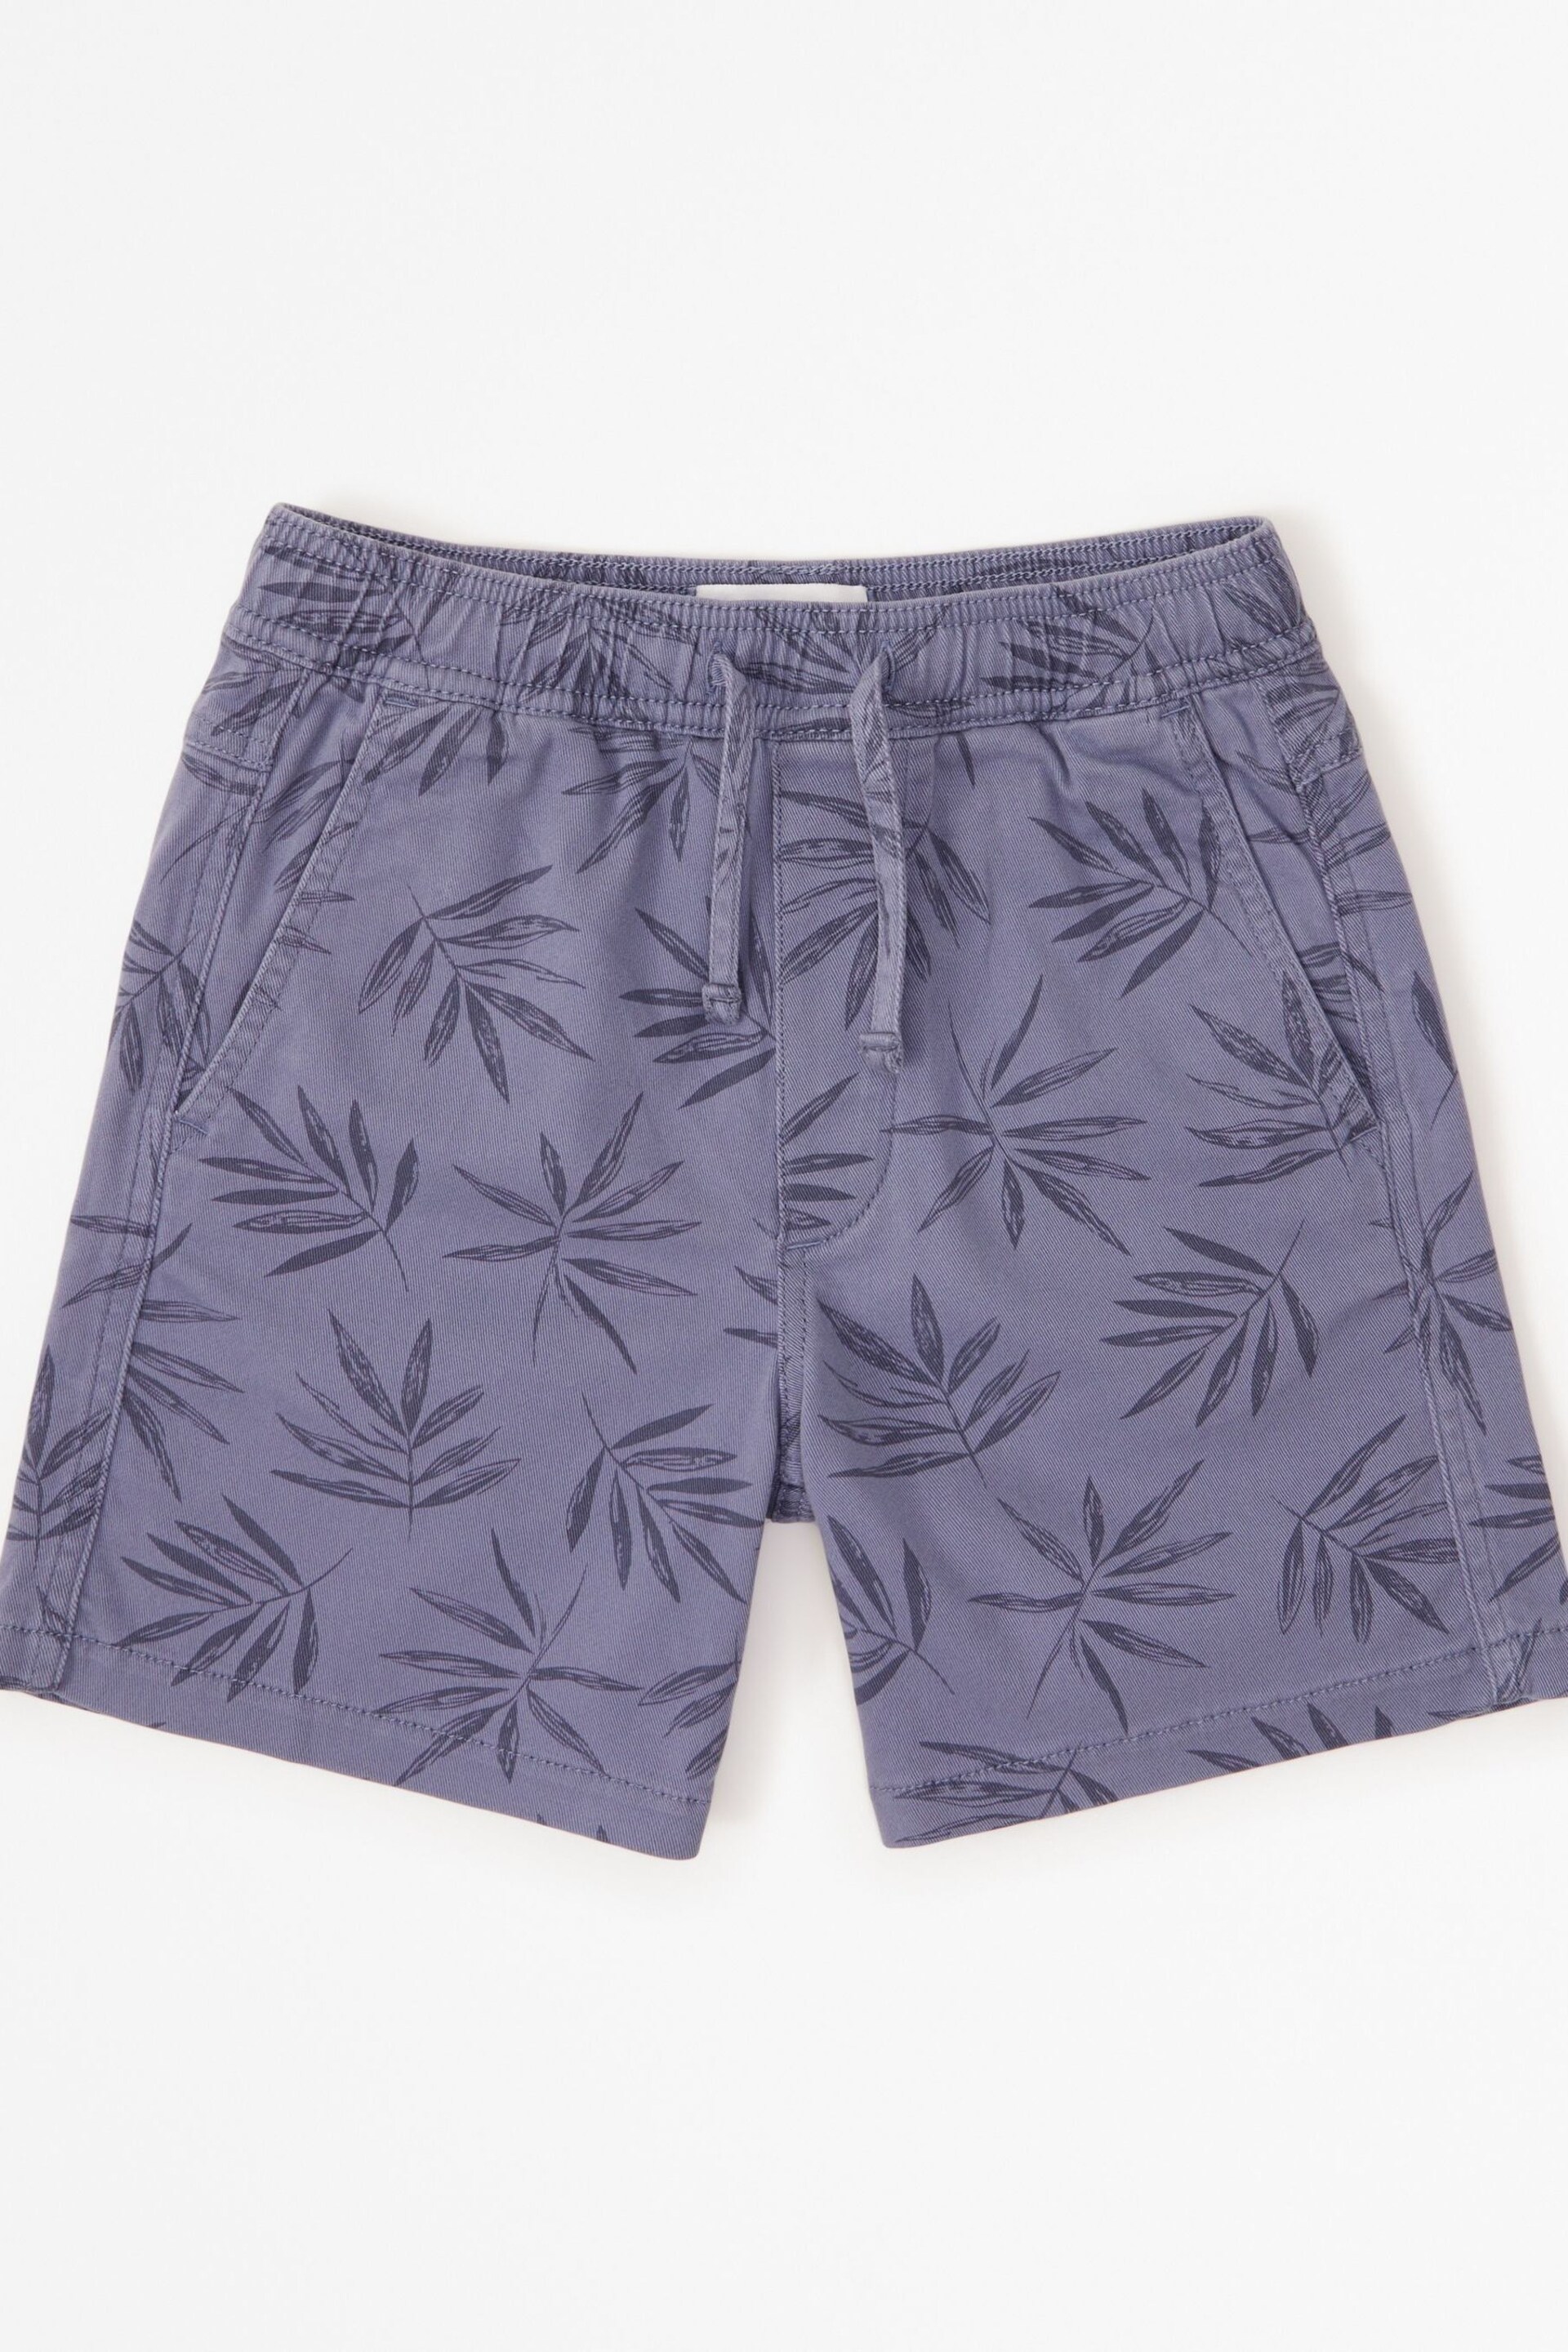 Abercrombie & Fitch Blue Palm Tree Printed Elasticated Waist Shorts - Image 1 of 1